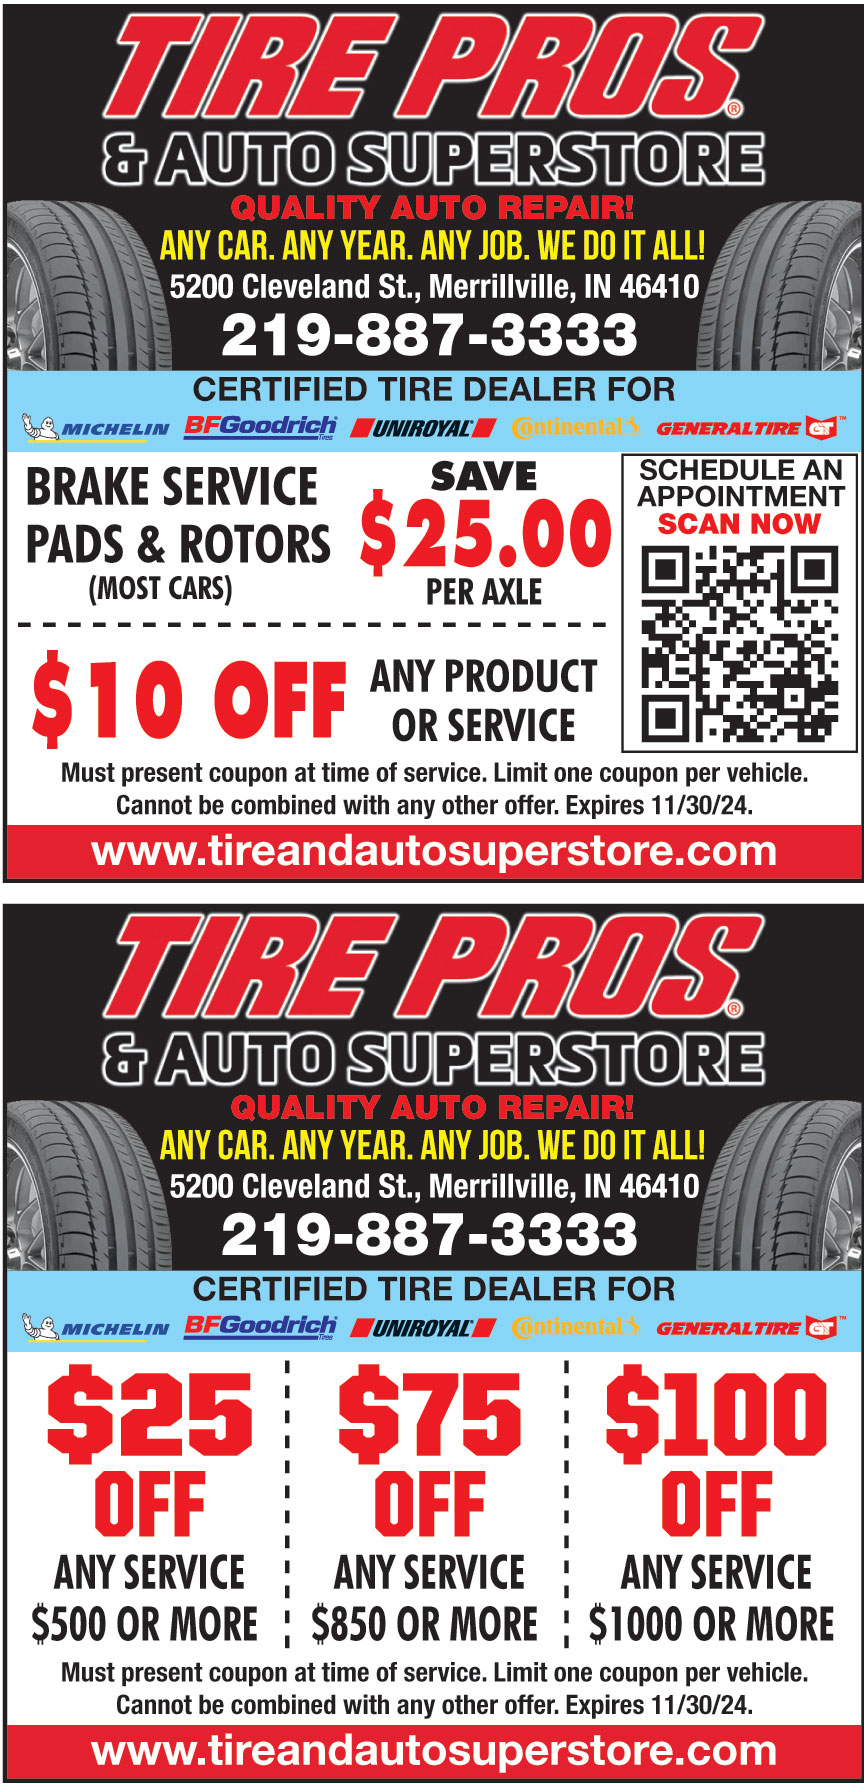 TIRE PROS AND AUTO SUPERS